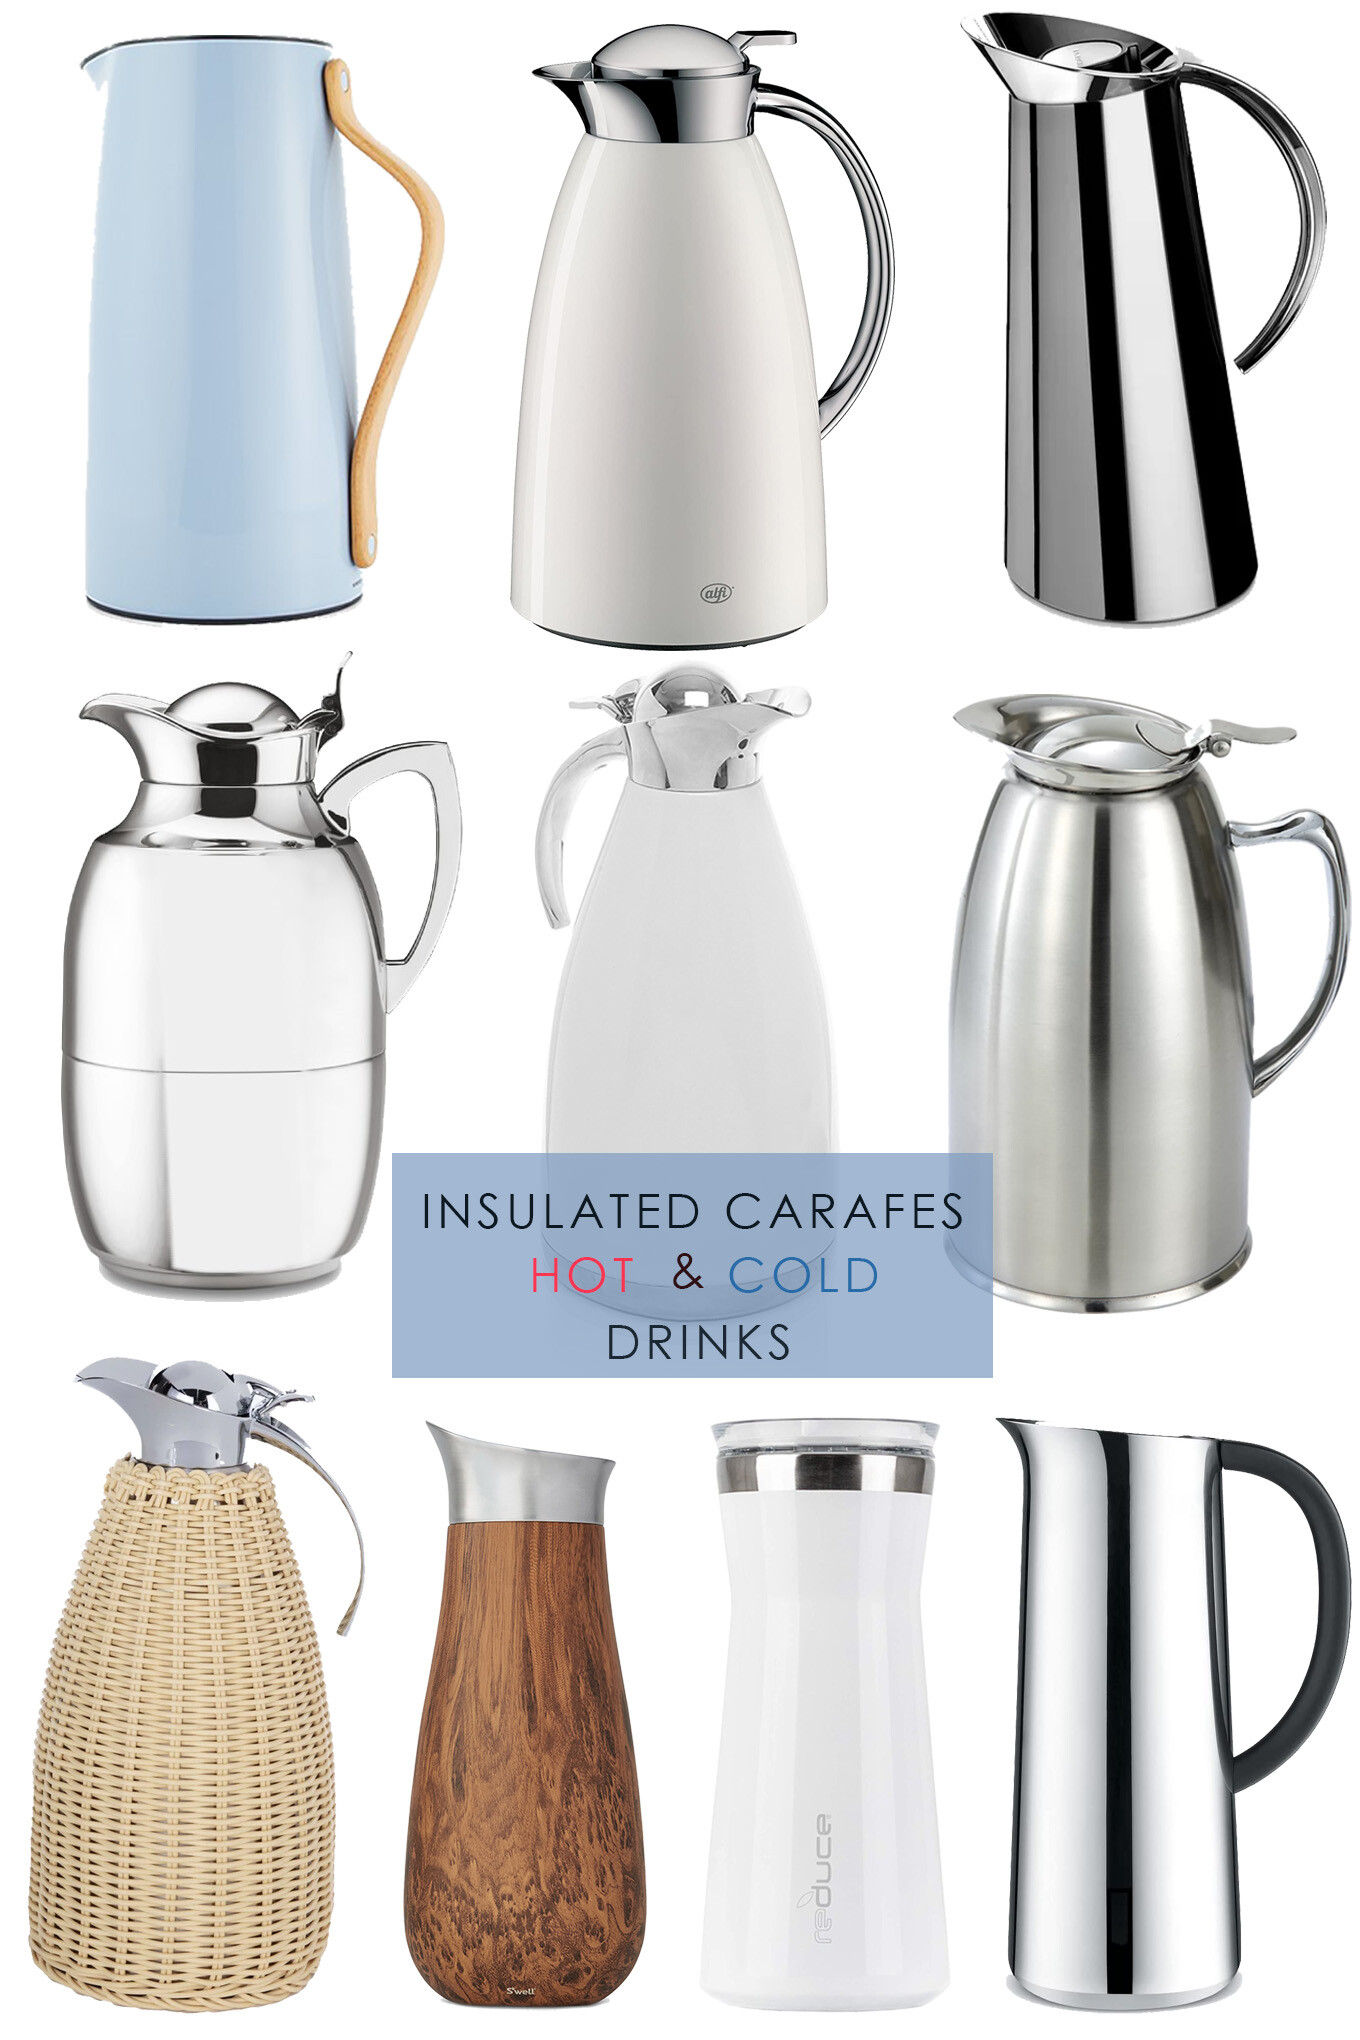 Need to drink more water? How about using one of these insulated carafes to keep your drinks hot or cold? It will keep the thirst away!